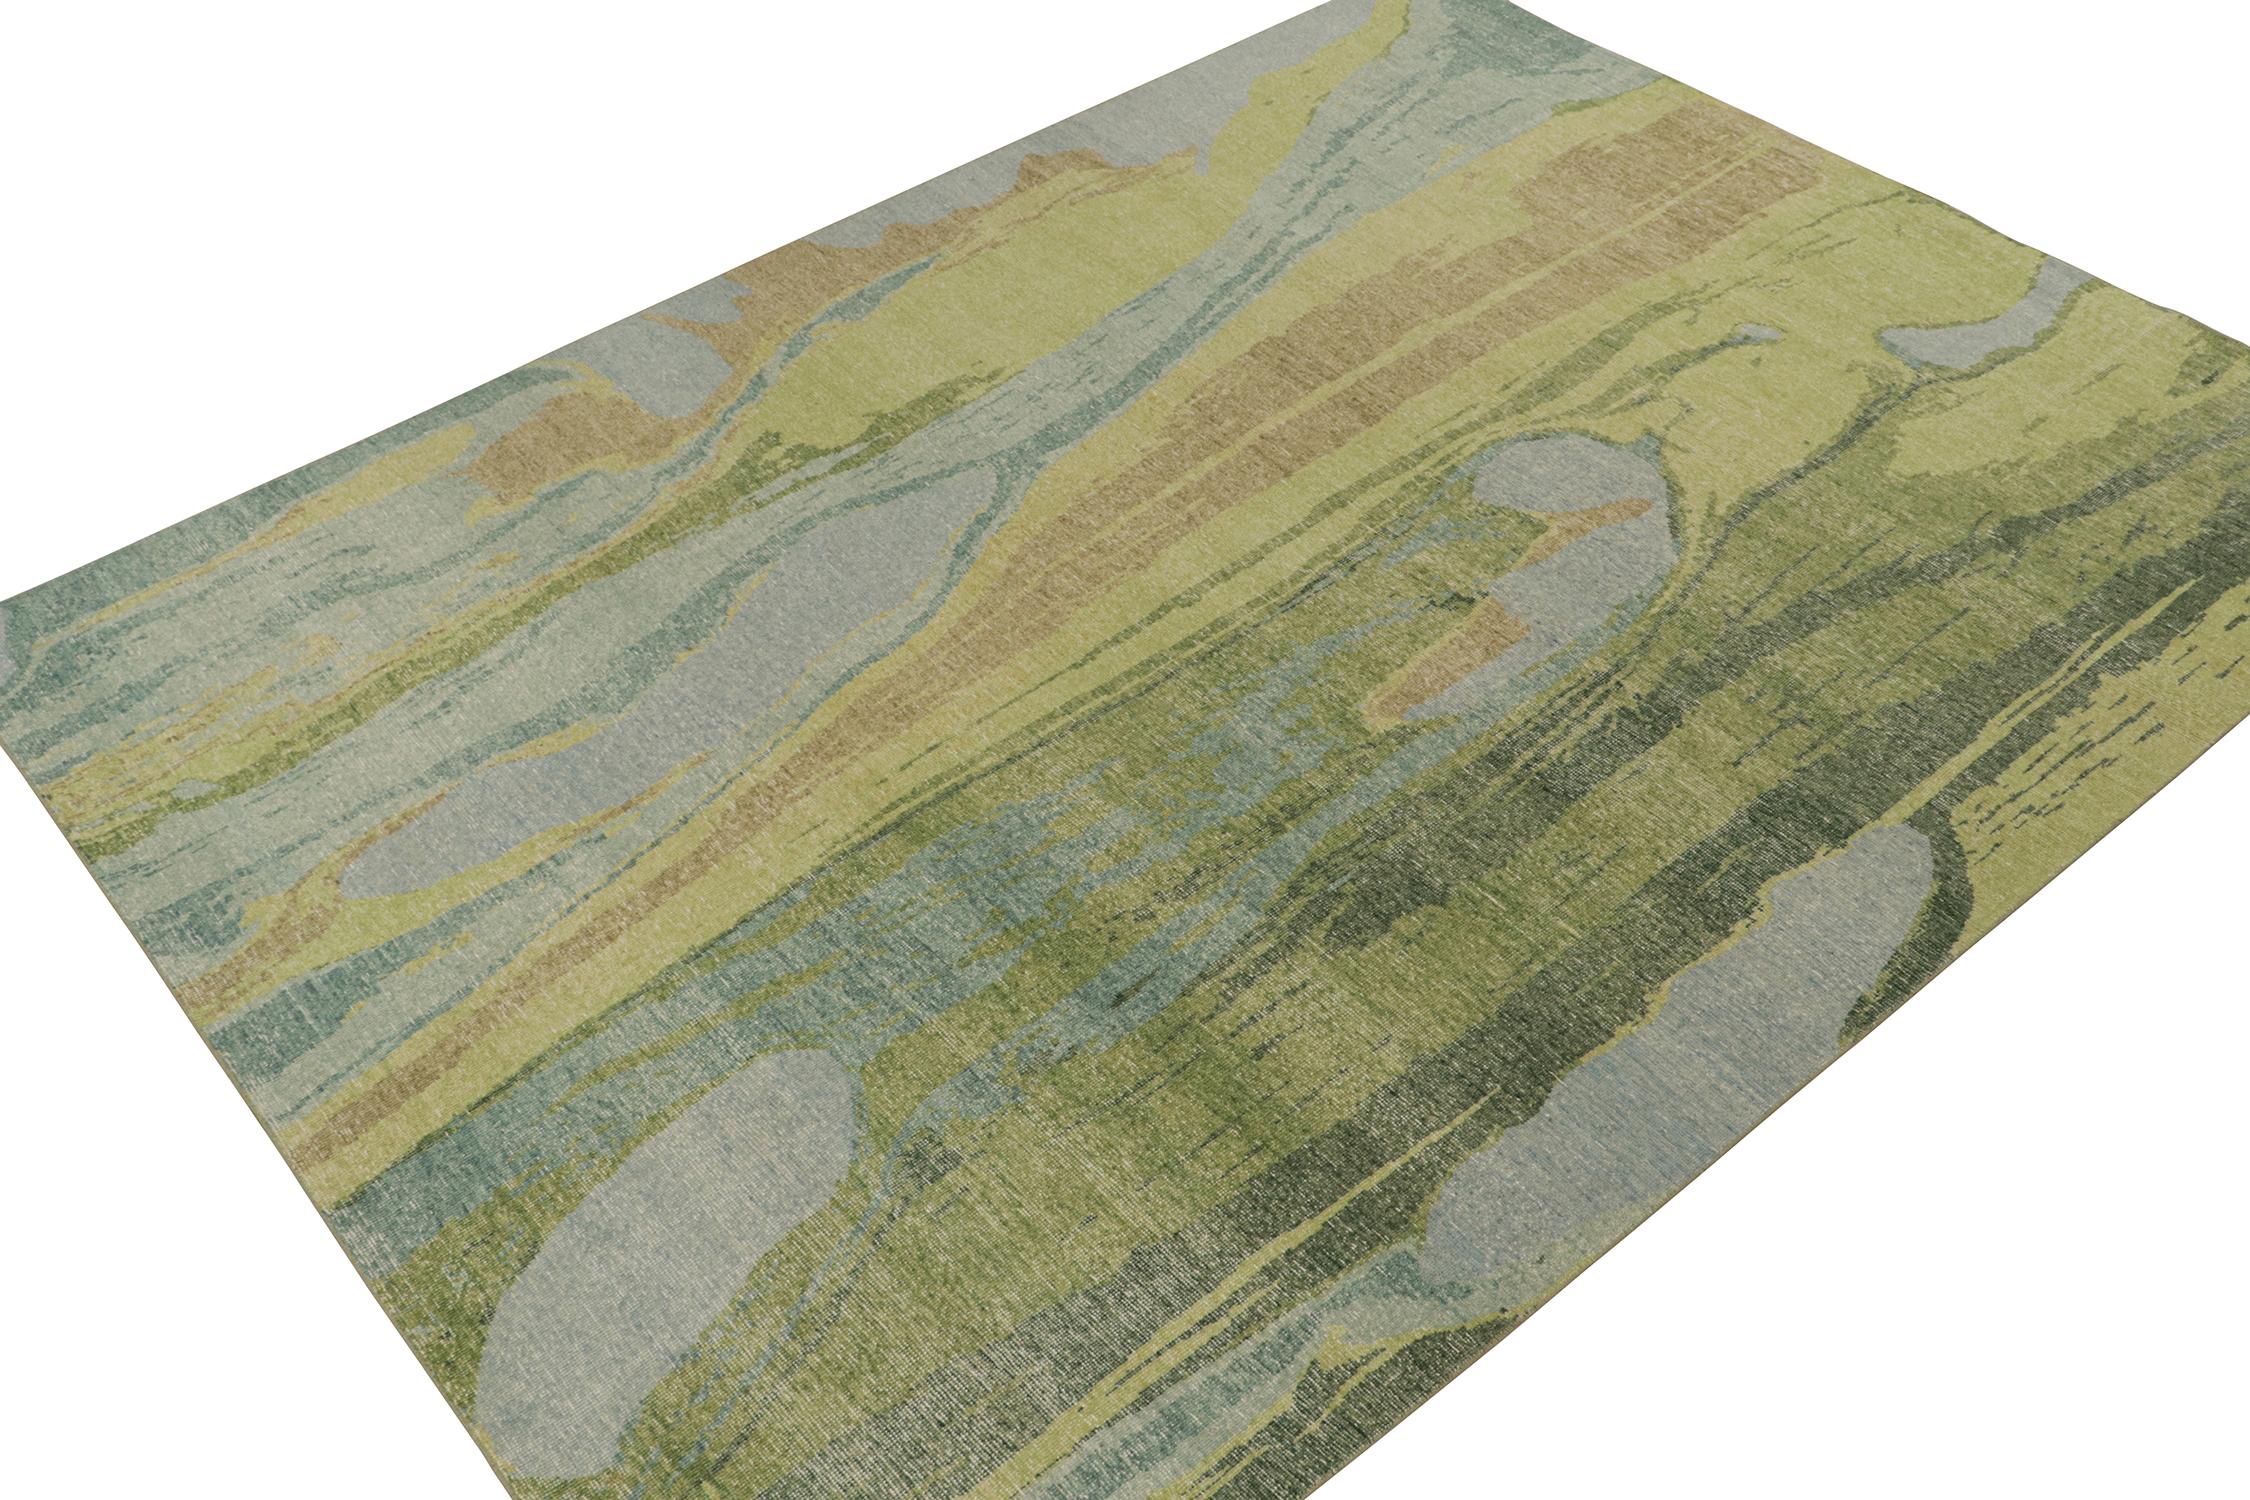 This contemporary 9x12 abstract rug is a new addition to the Homage Collection by Rug & Kilim.

Further on the design:

Hand-knotted in wool and cotton, this design evokes a fluid play blue, green, beige, and gold paint strokes. Keen eyes might